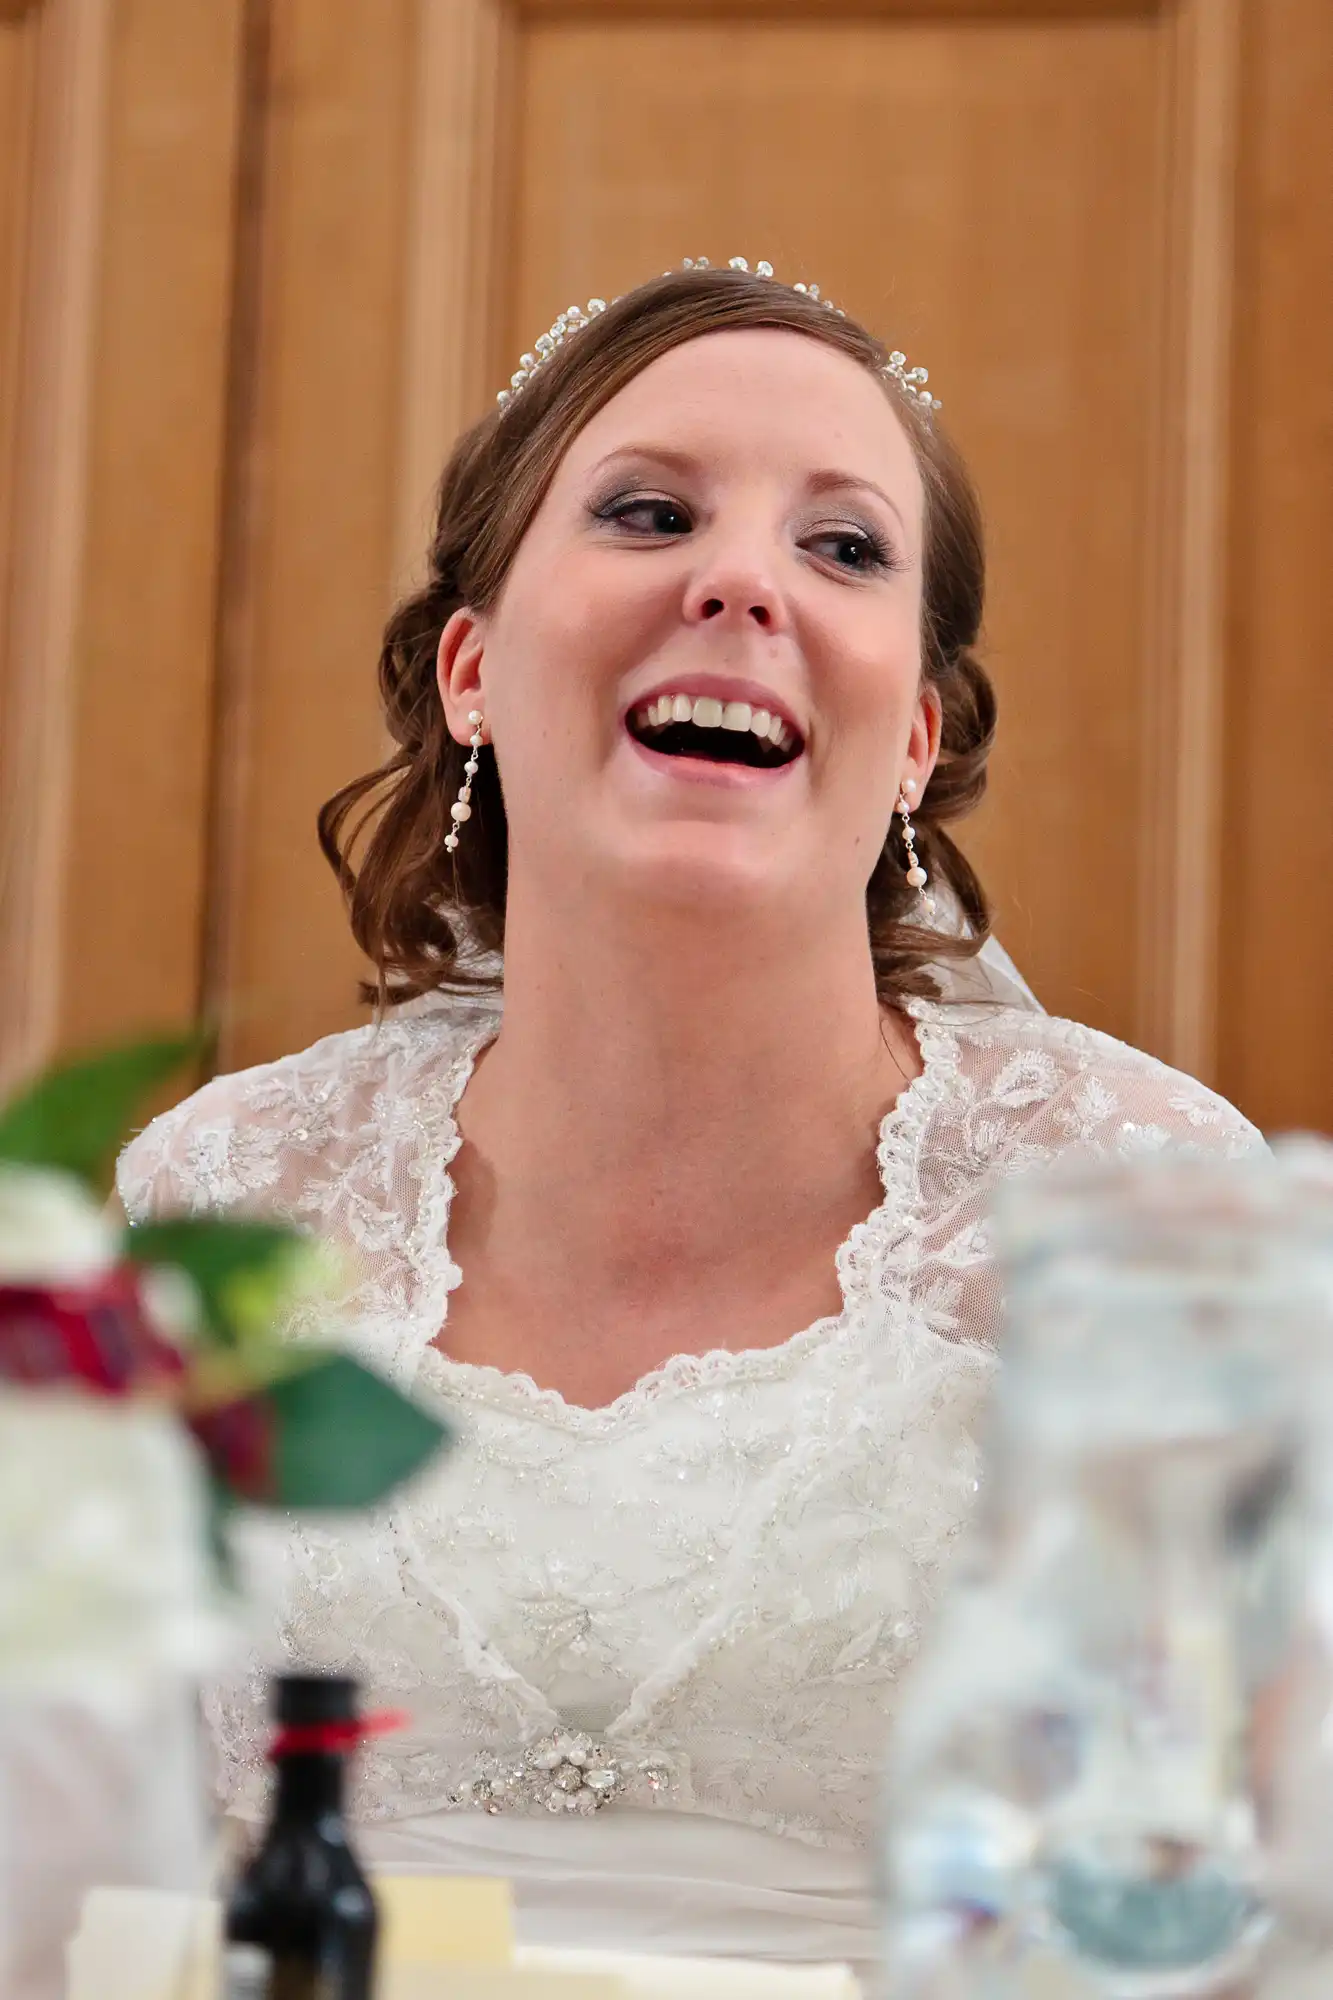 A bride in a lace wedding dress, smiling broadly at a table during a reception, adorned with a tiara and earrings.